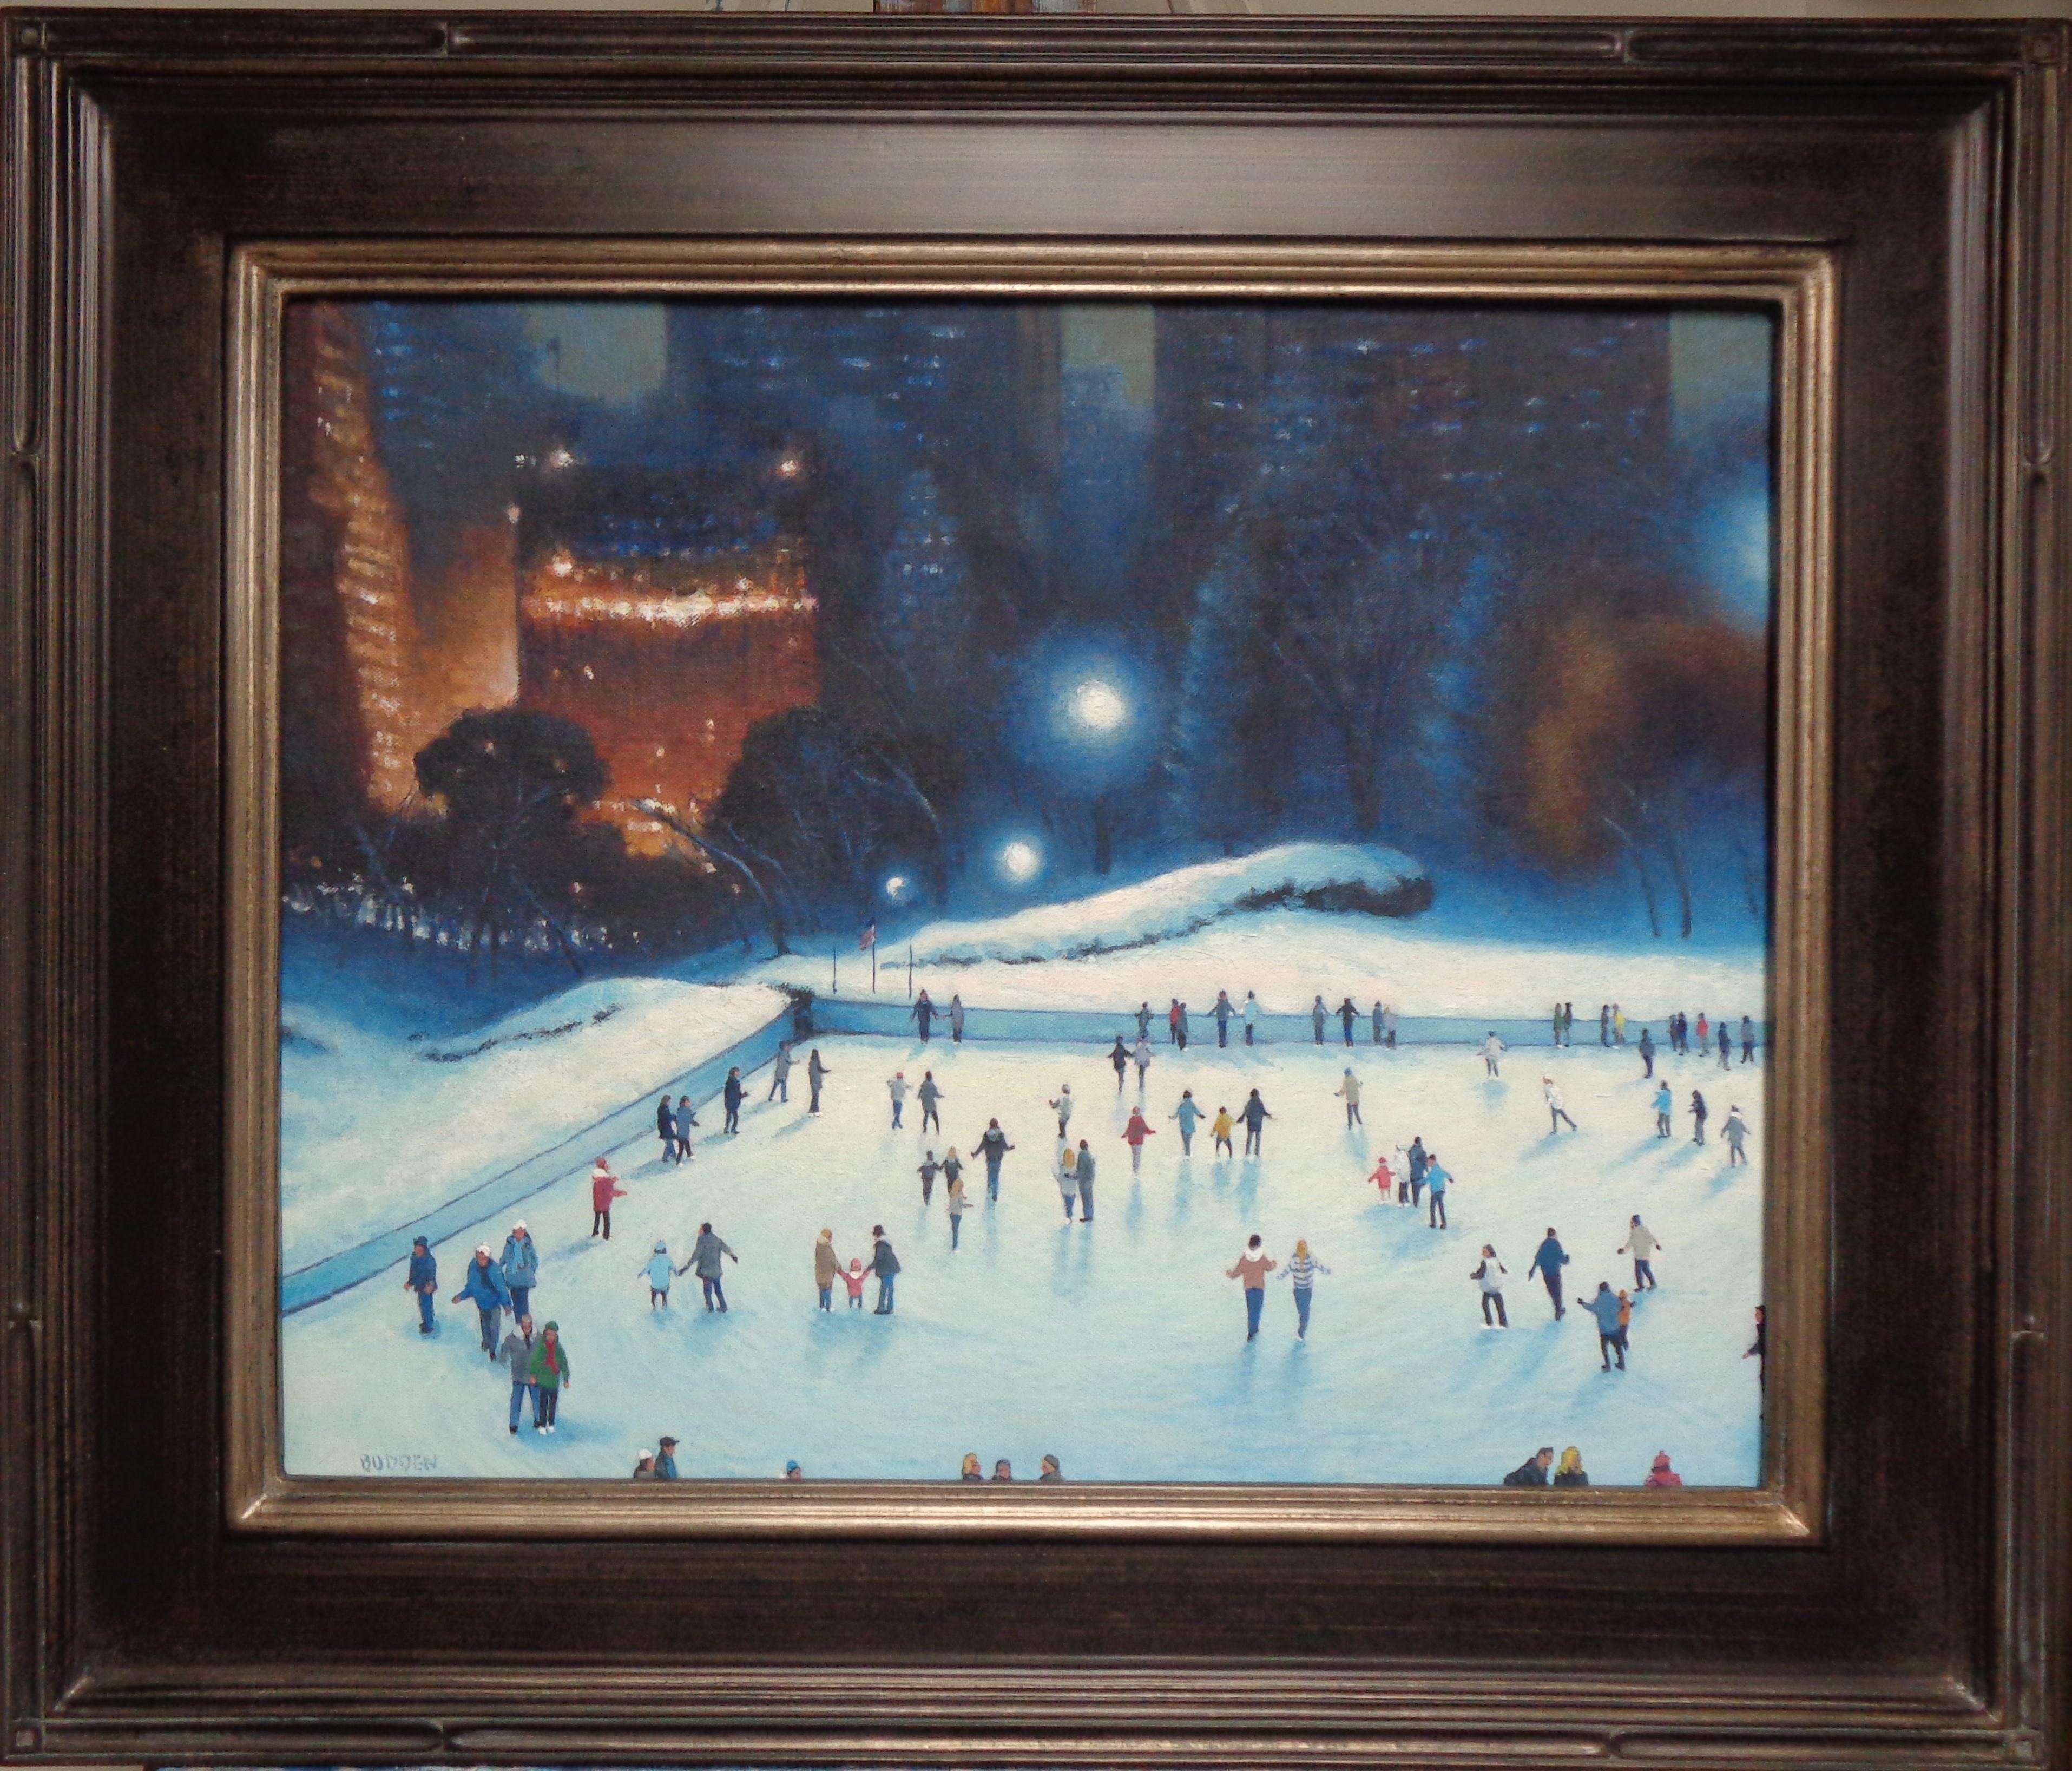 Evening Lights Wolman Rink Central Park is an oil painting  on canvas panel by award winning contemporary artist Michael Budden. Rockefeller Center is obviously a favorite spot to hit while visiting NYC in winter and an iconic image for sure.  I